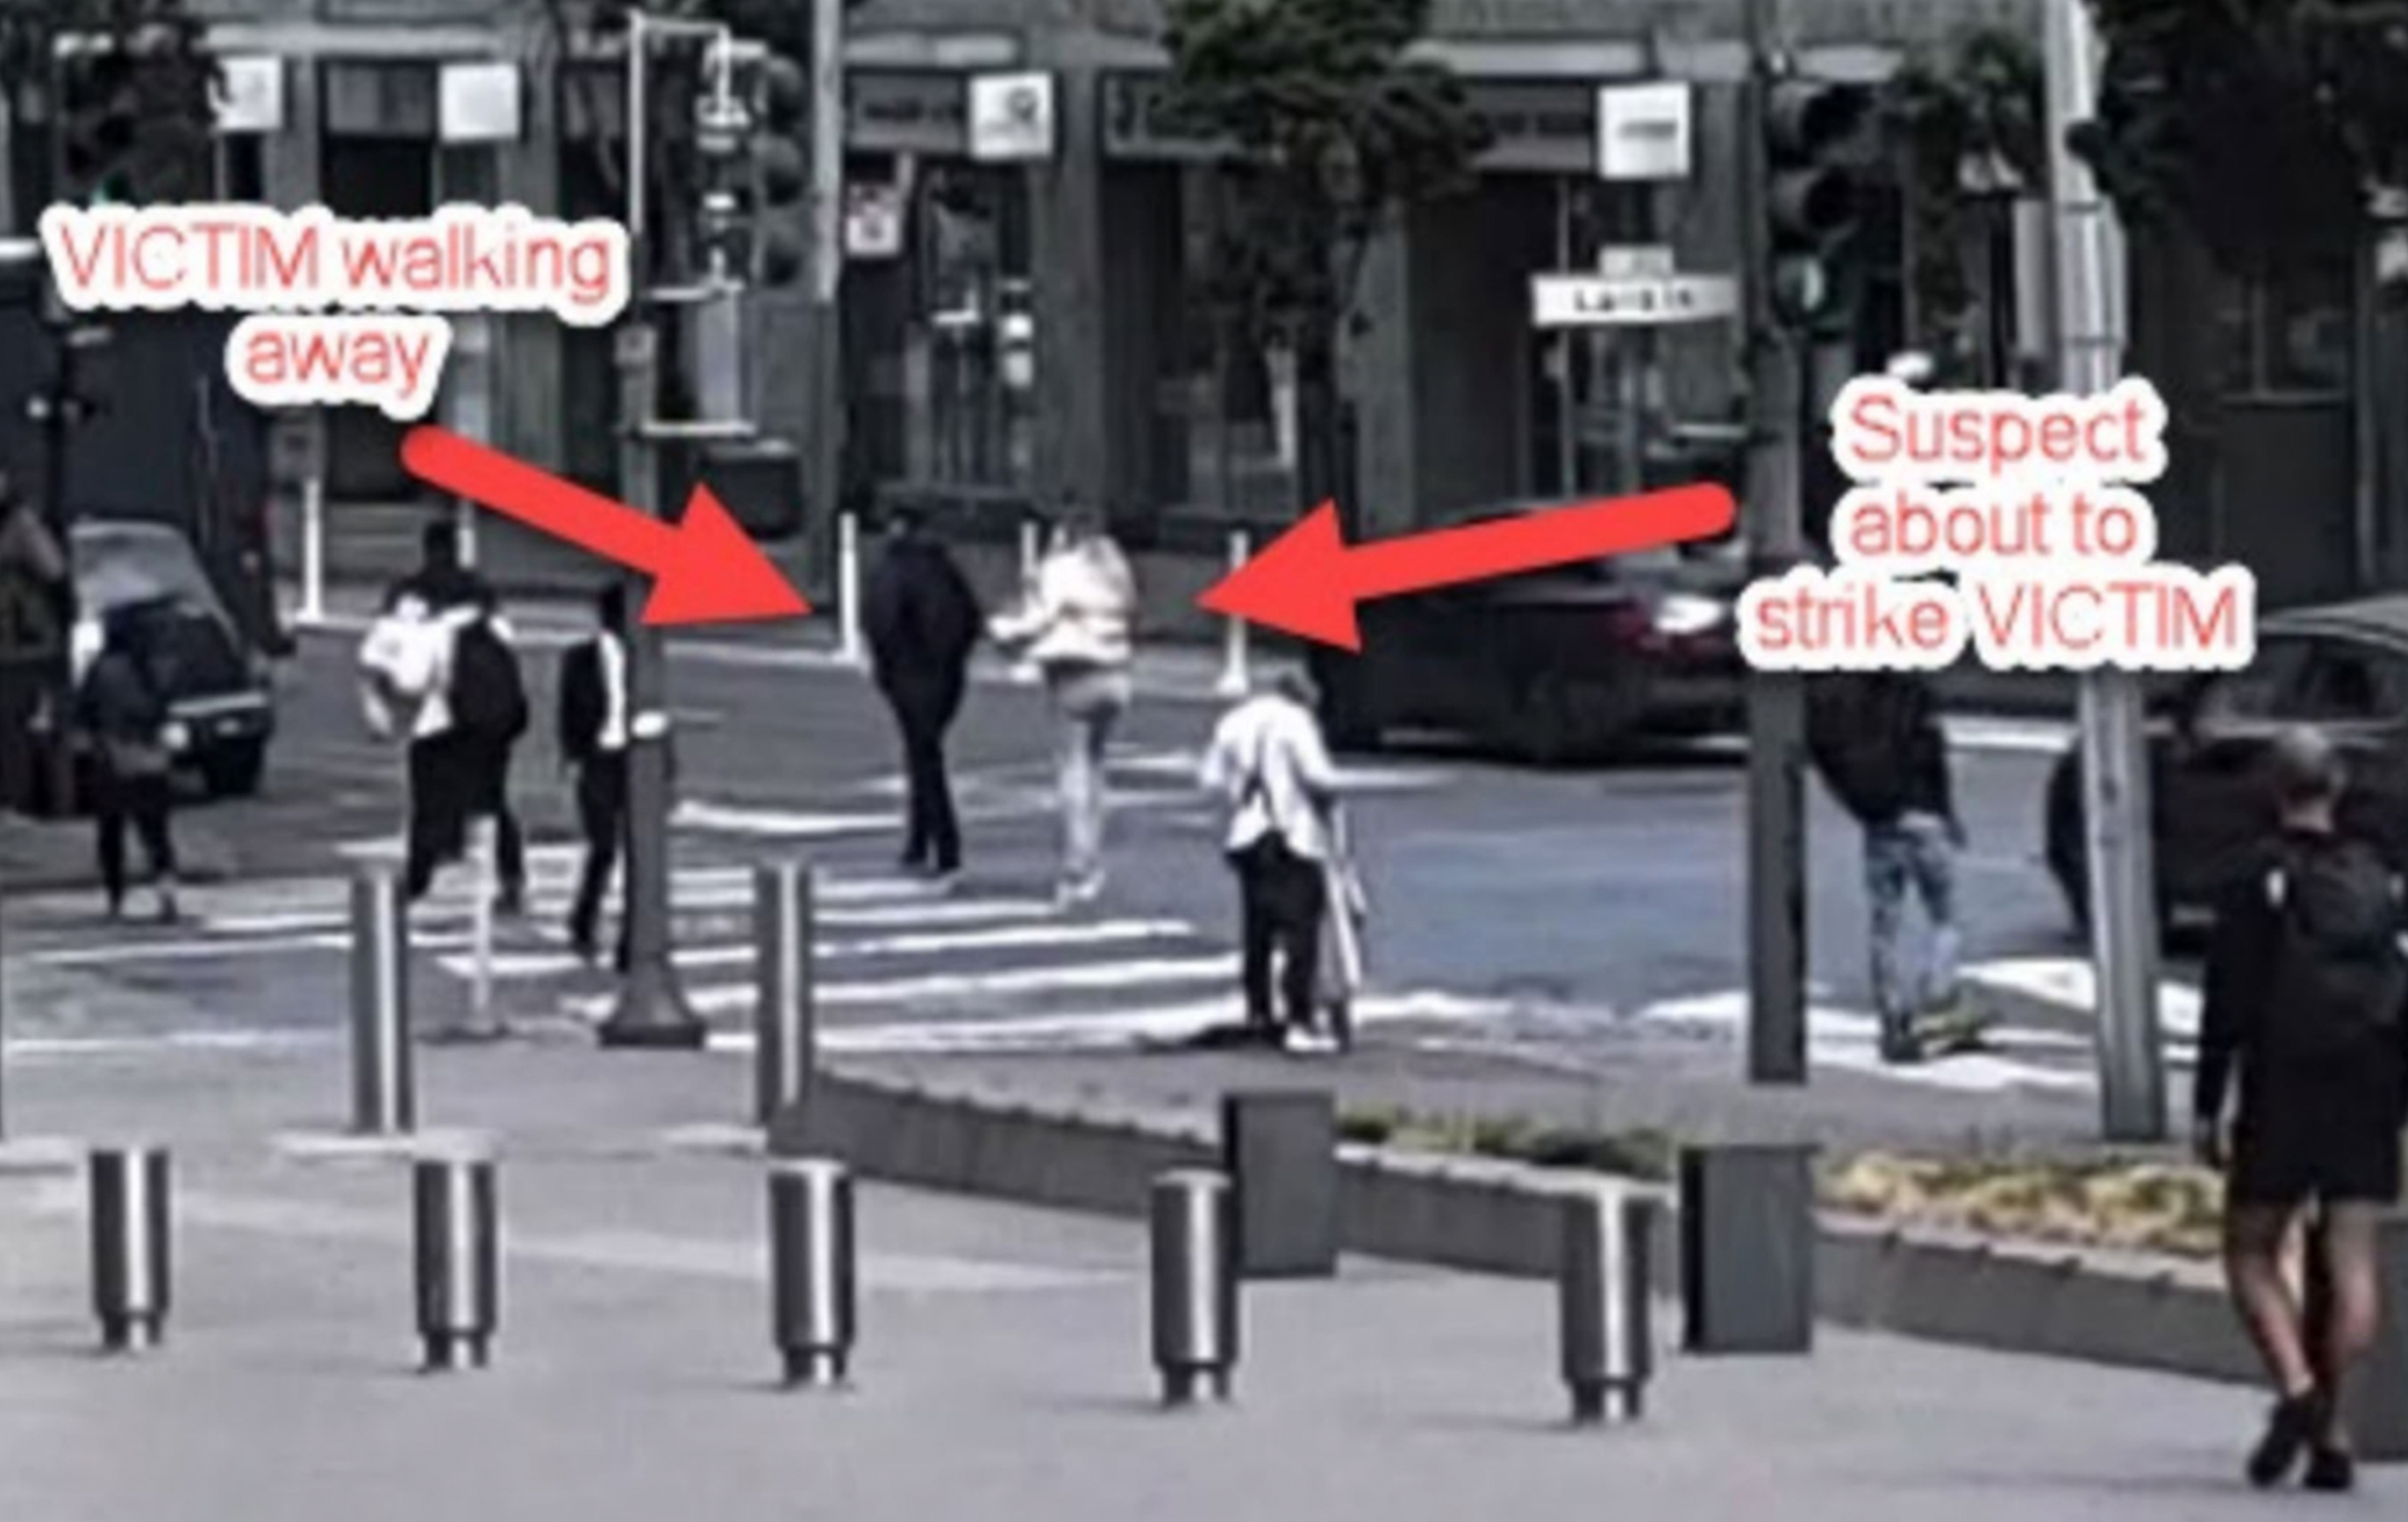 A video image of a woman walking on the street.